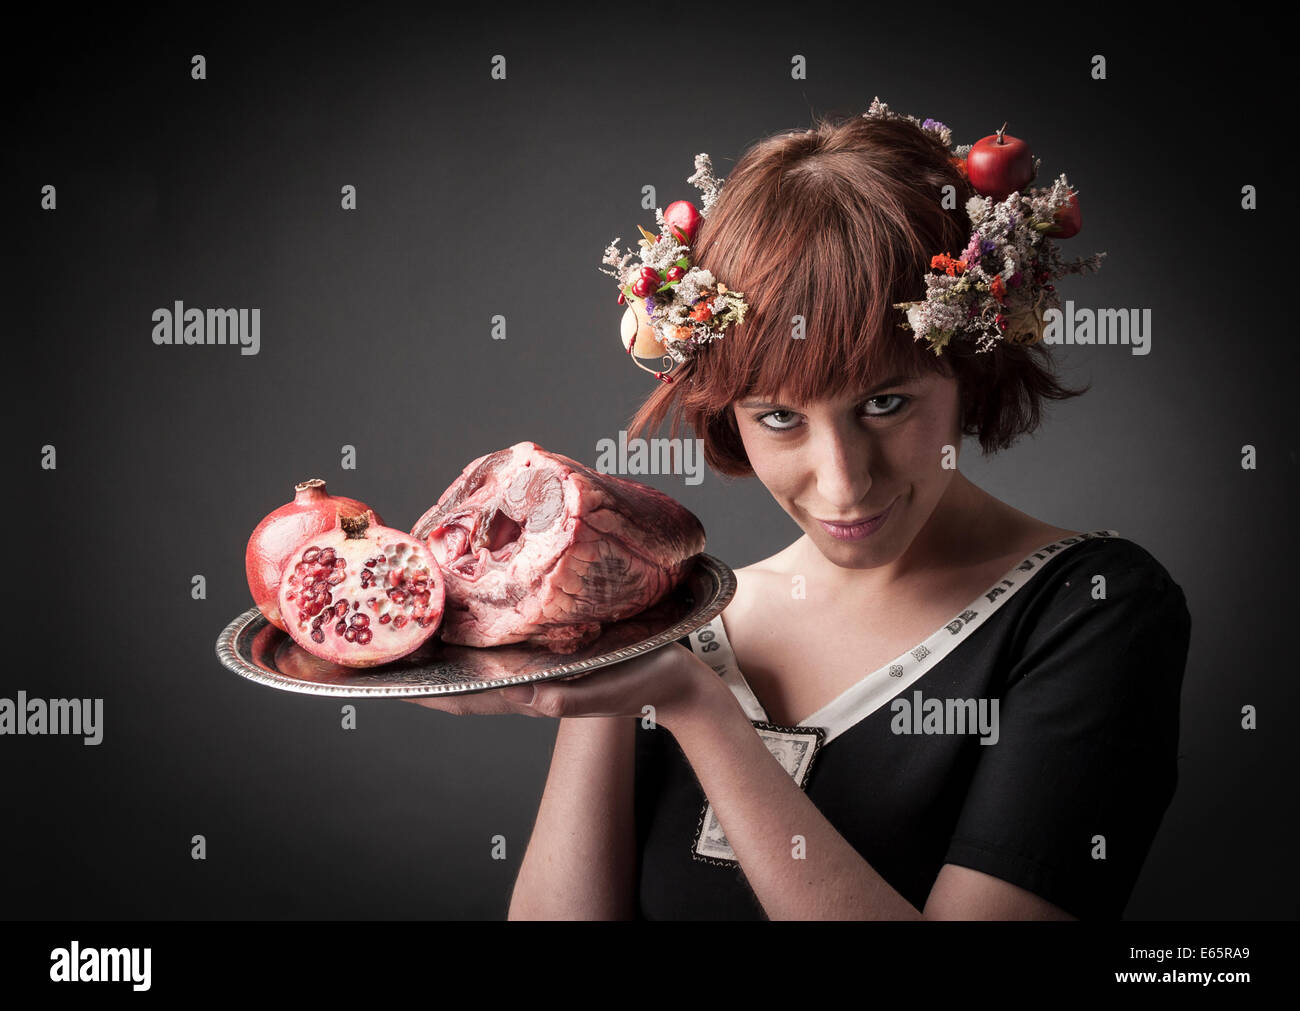 maid serving raw food Stock Photo